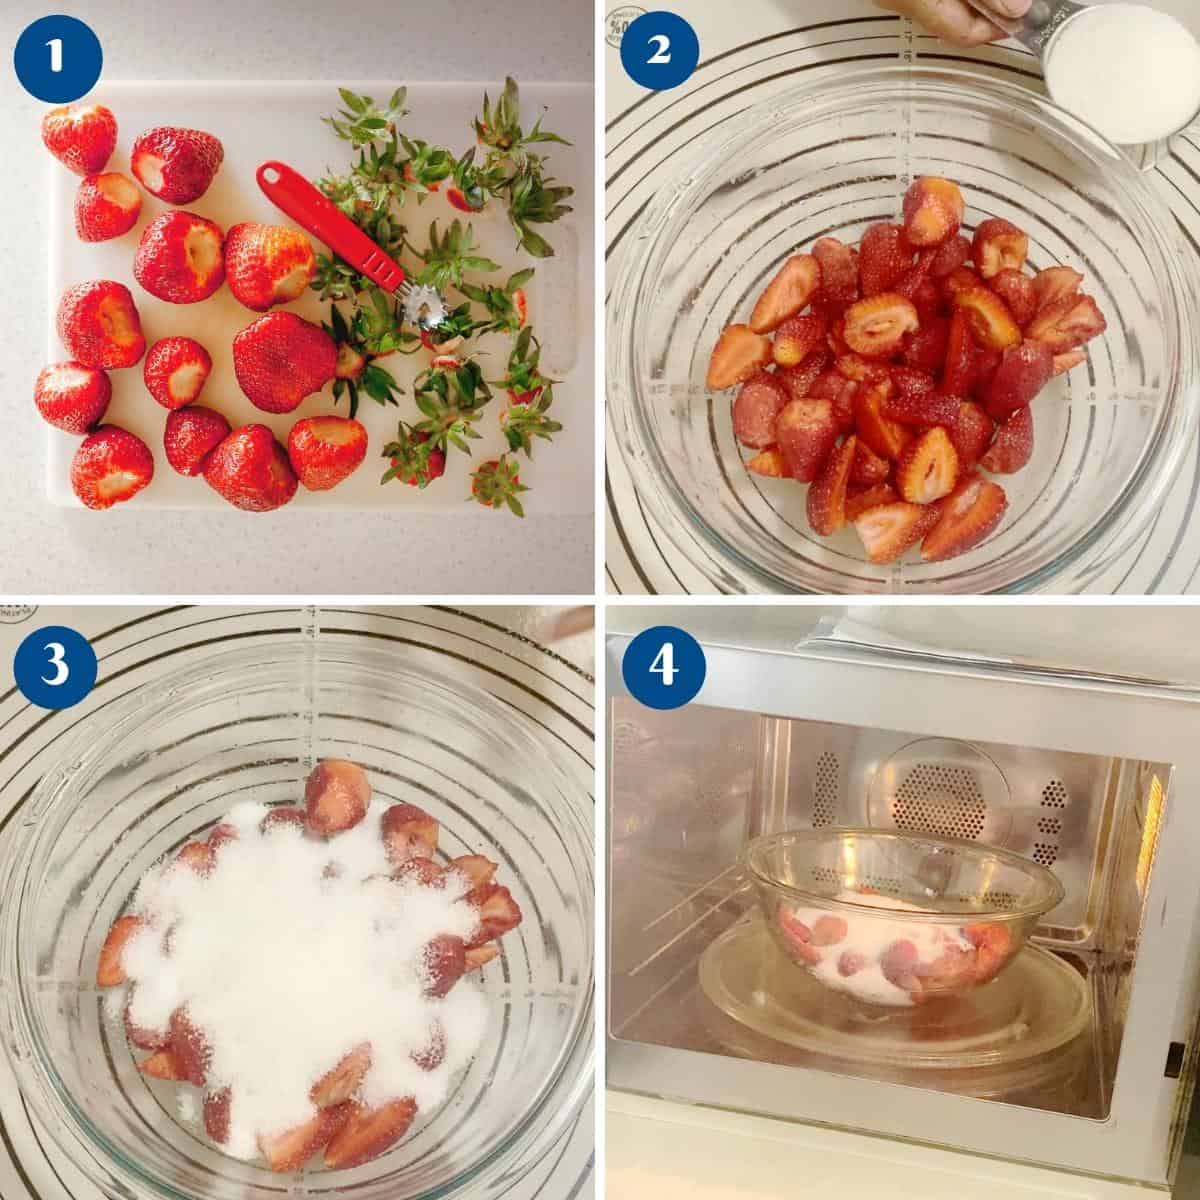 Progress pictures for microwave strawberry jam.